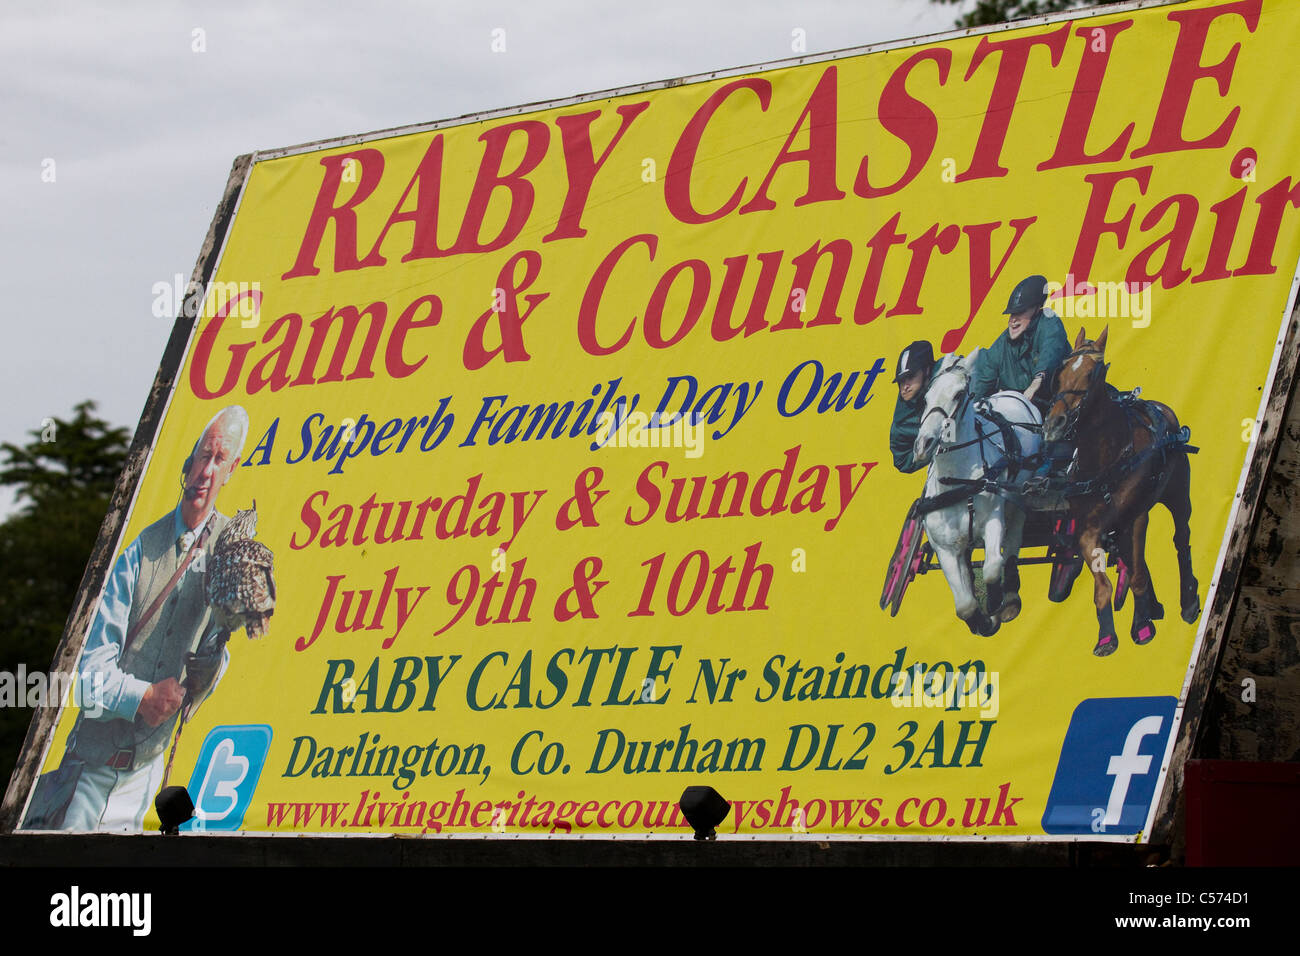 Raby Castle Game & Country Fair, Staindrop, Durham, Regno Unito Foto Stock